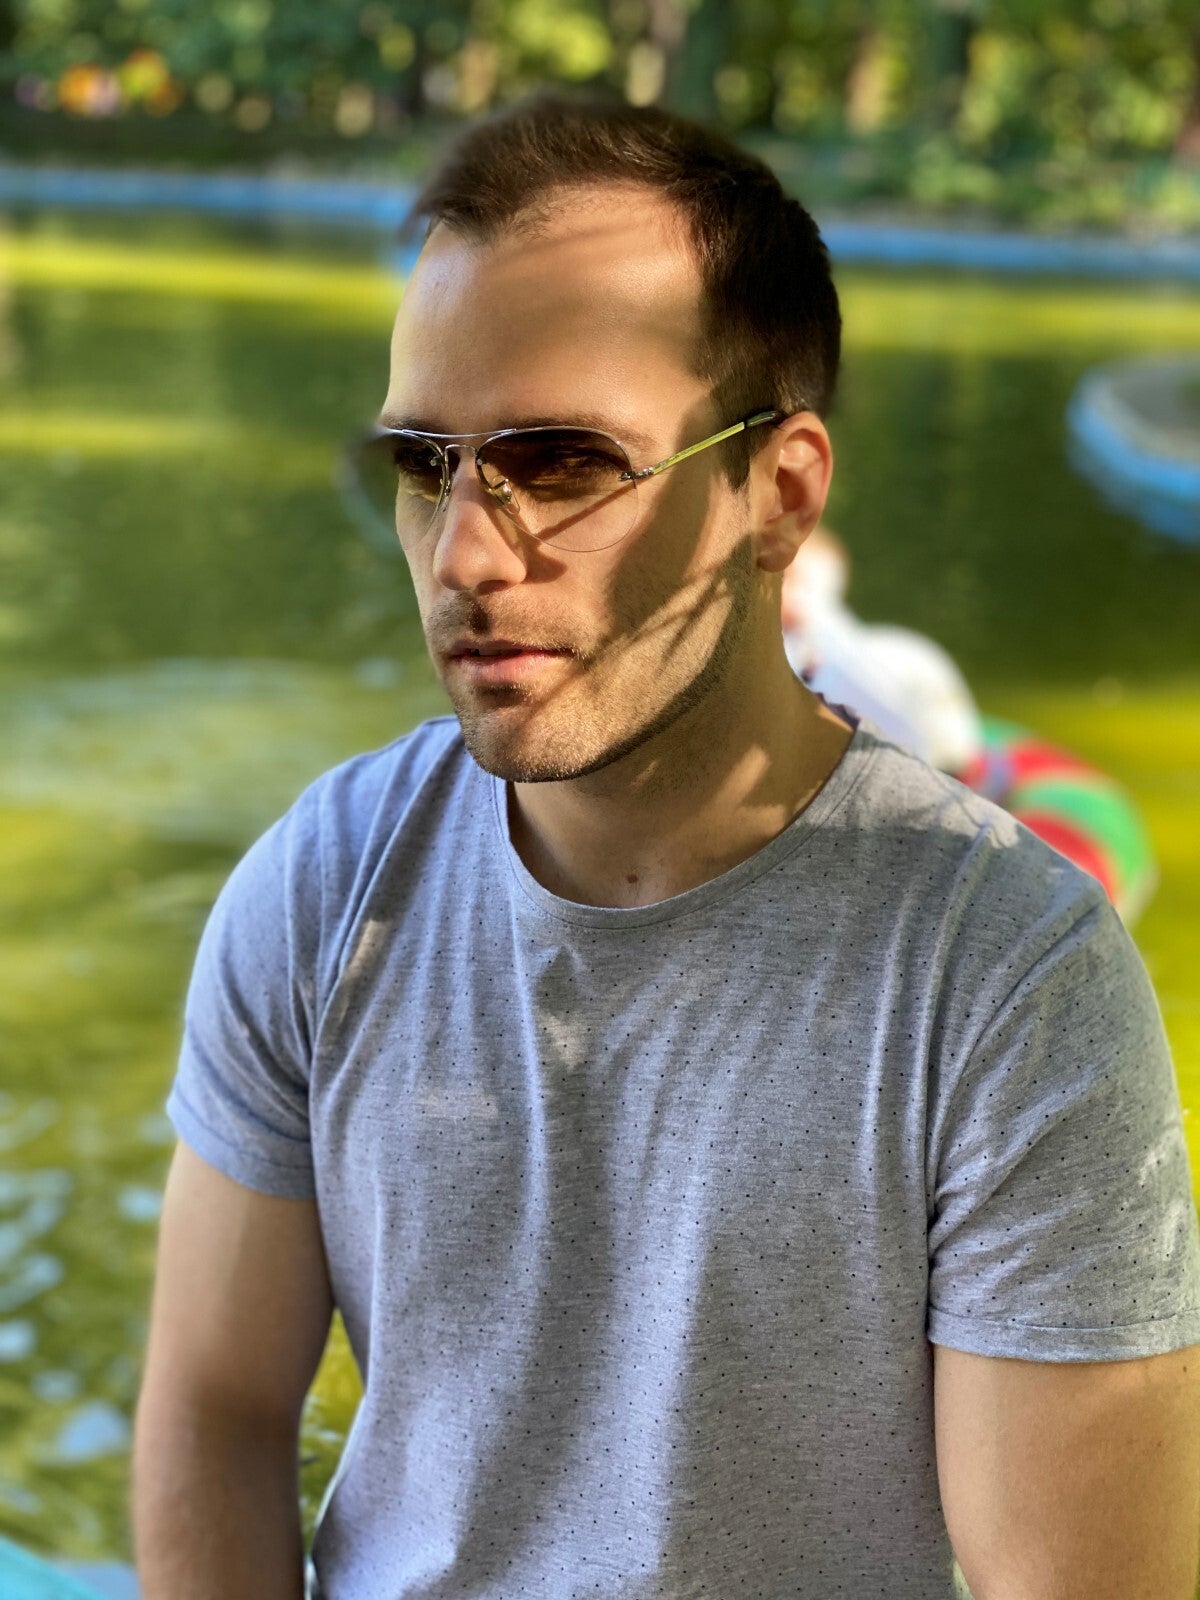 Notice how the iPhone has trouble with glasses in portraits - Apple iPhone 11 Pro and Pro Max Review